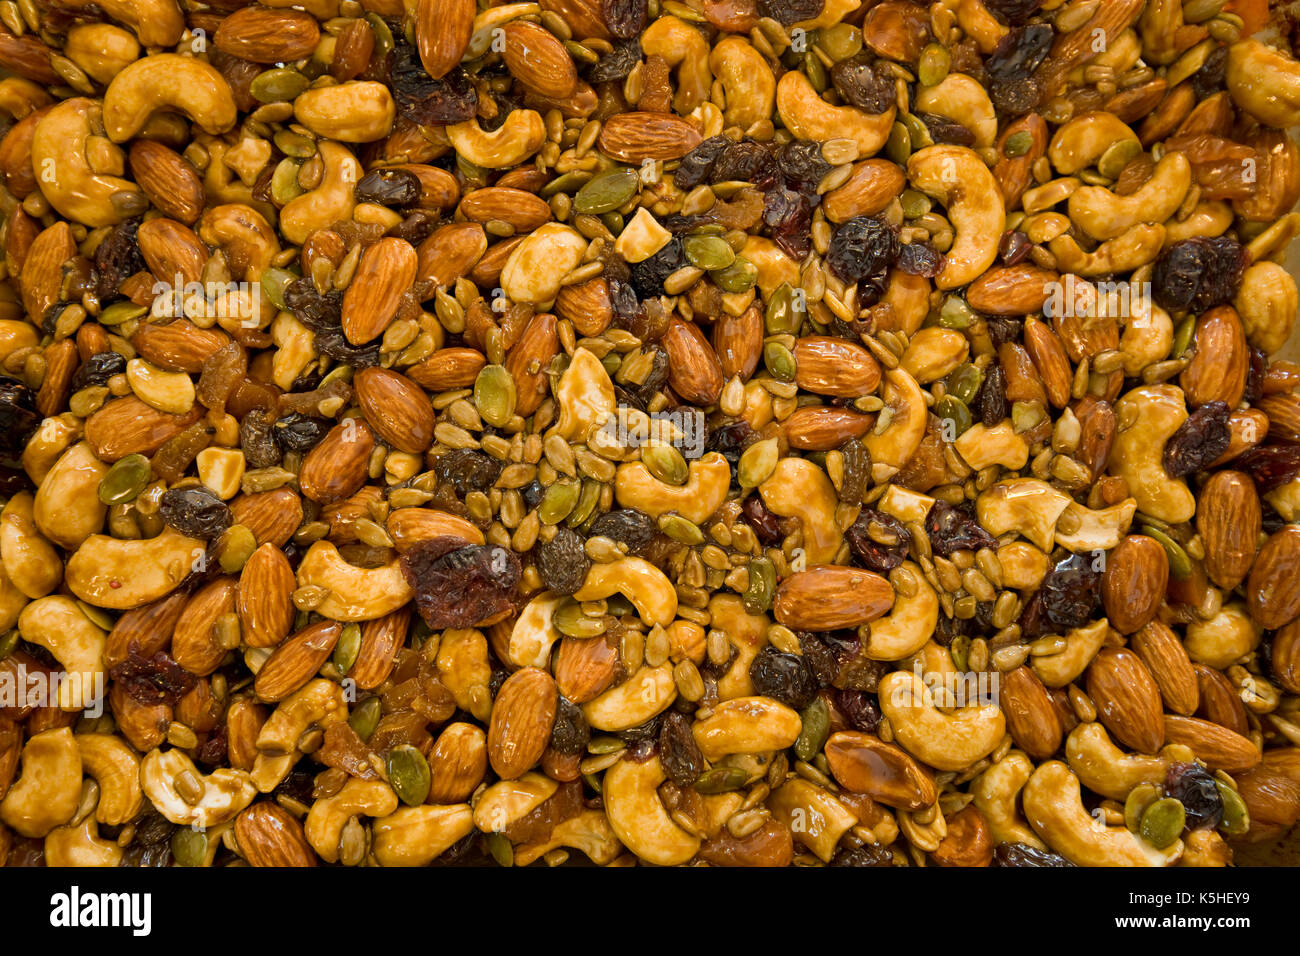 Mixed nuts, seeds and dried fruit Stock Photo